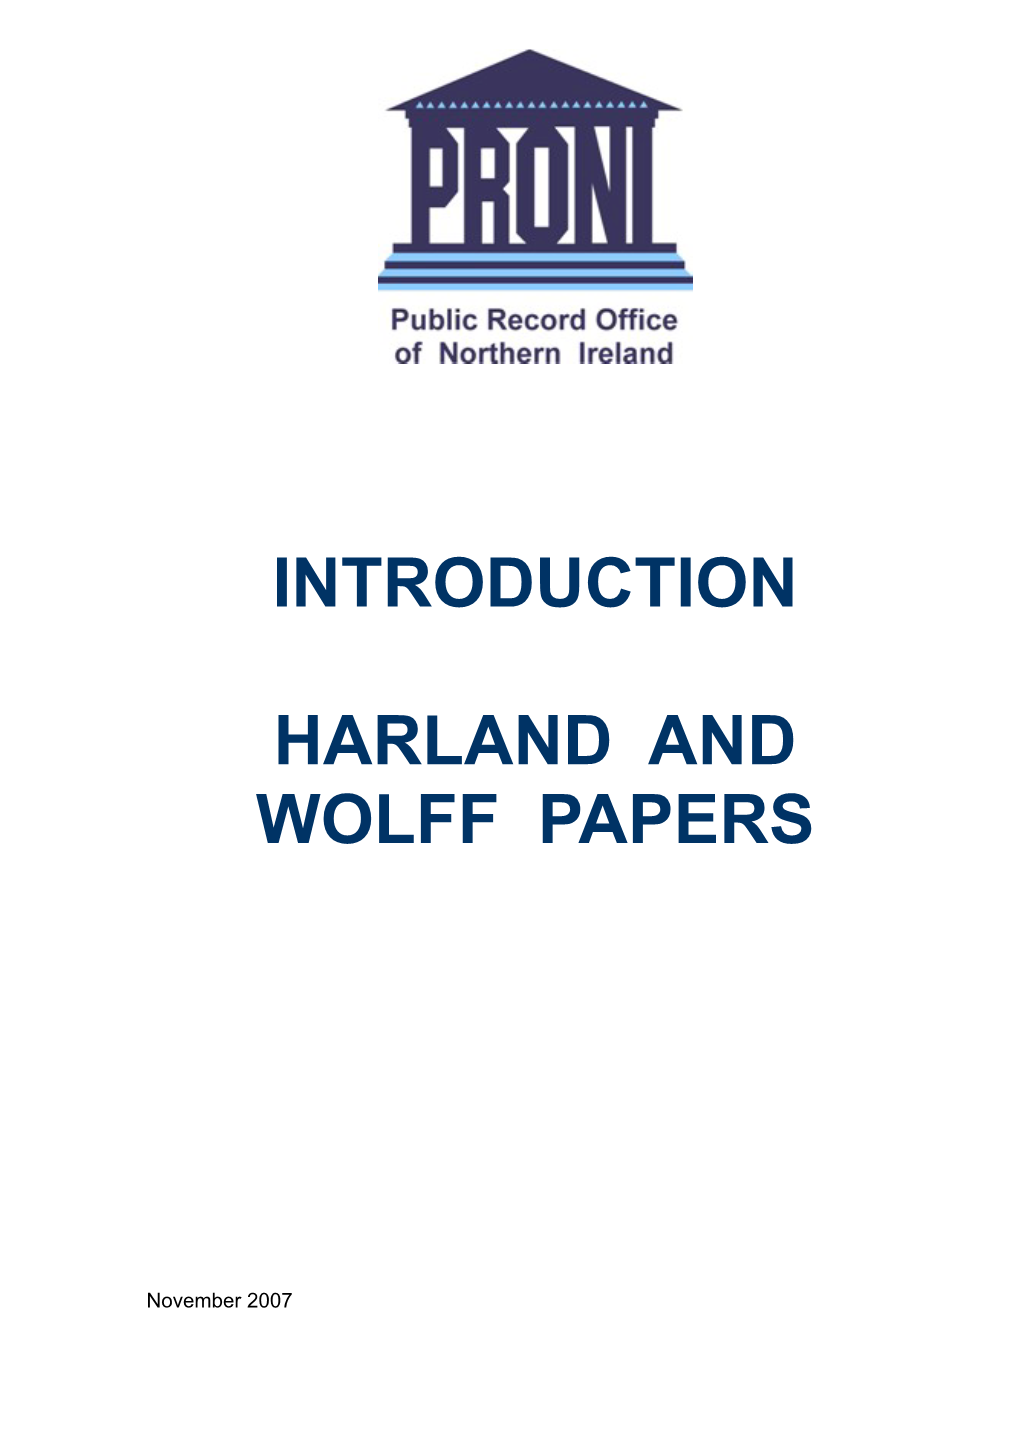 Introduction to the Harland & Wolff Papers